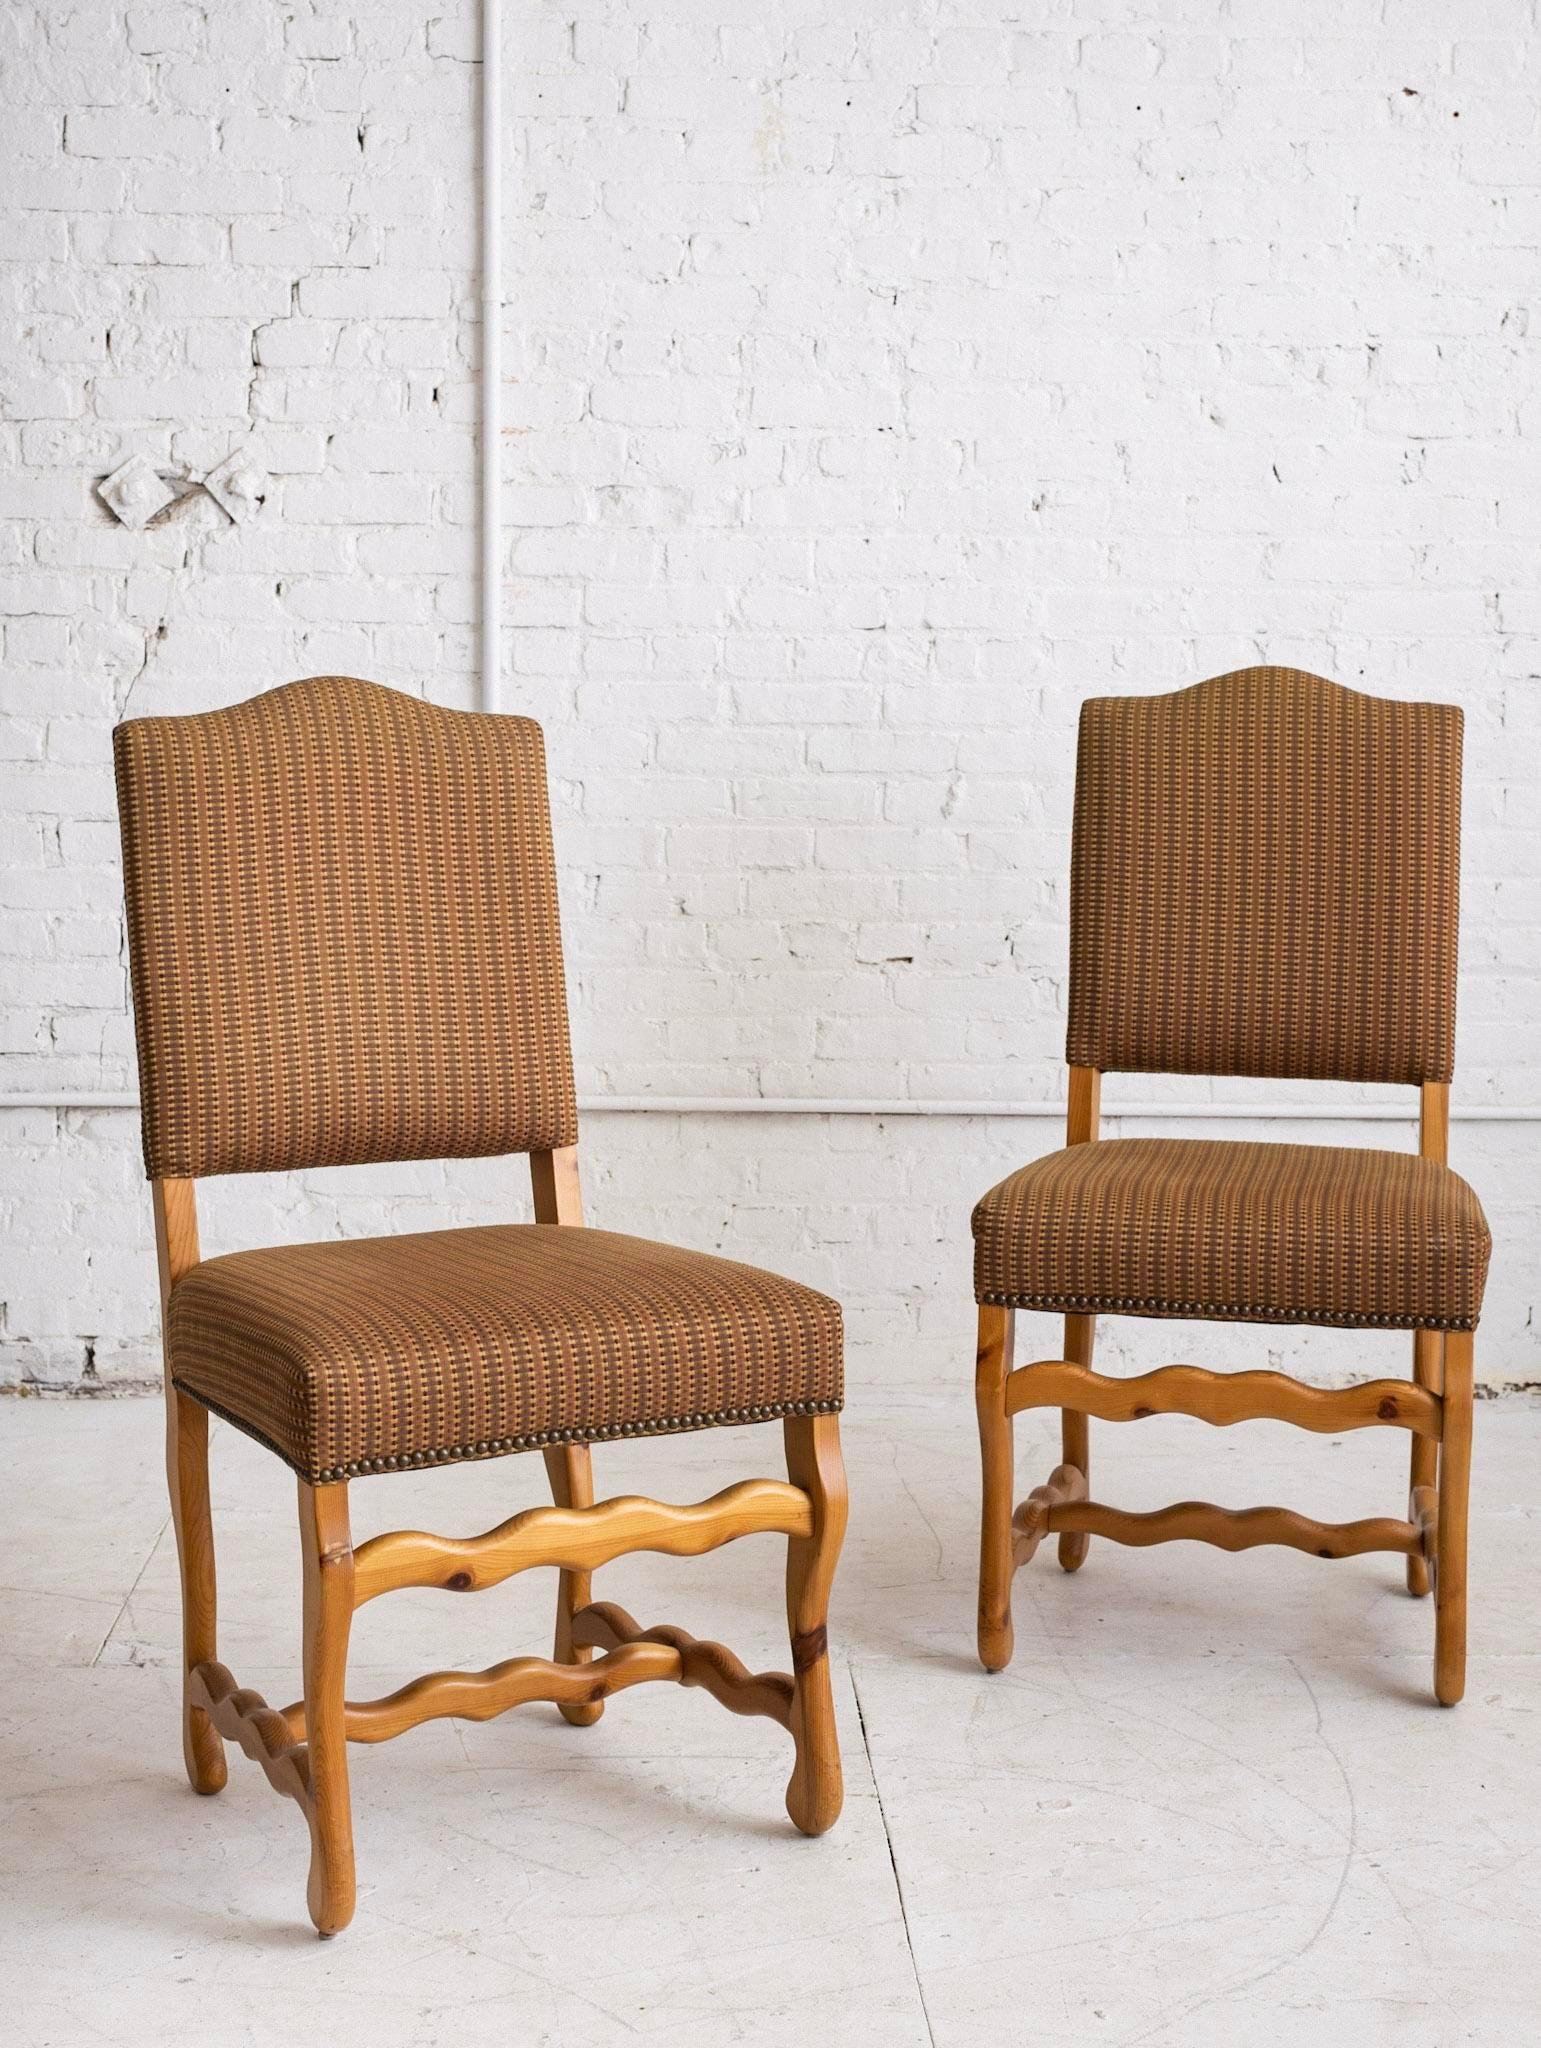 North American Post Modern 'Squiggle' Form Knotty Pine Dining Chairs - A Set of 4 For Sale